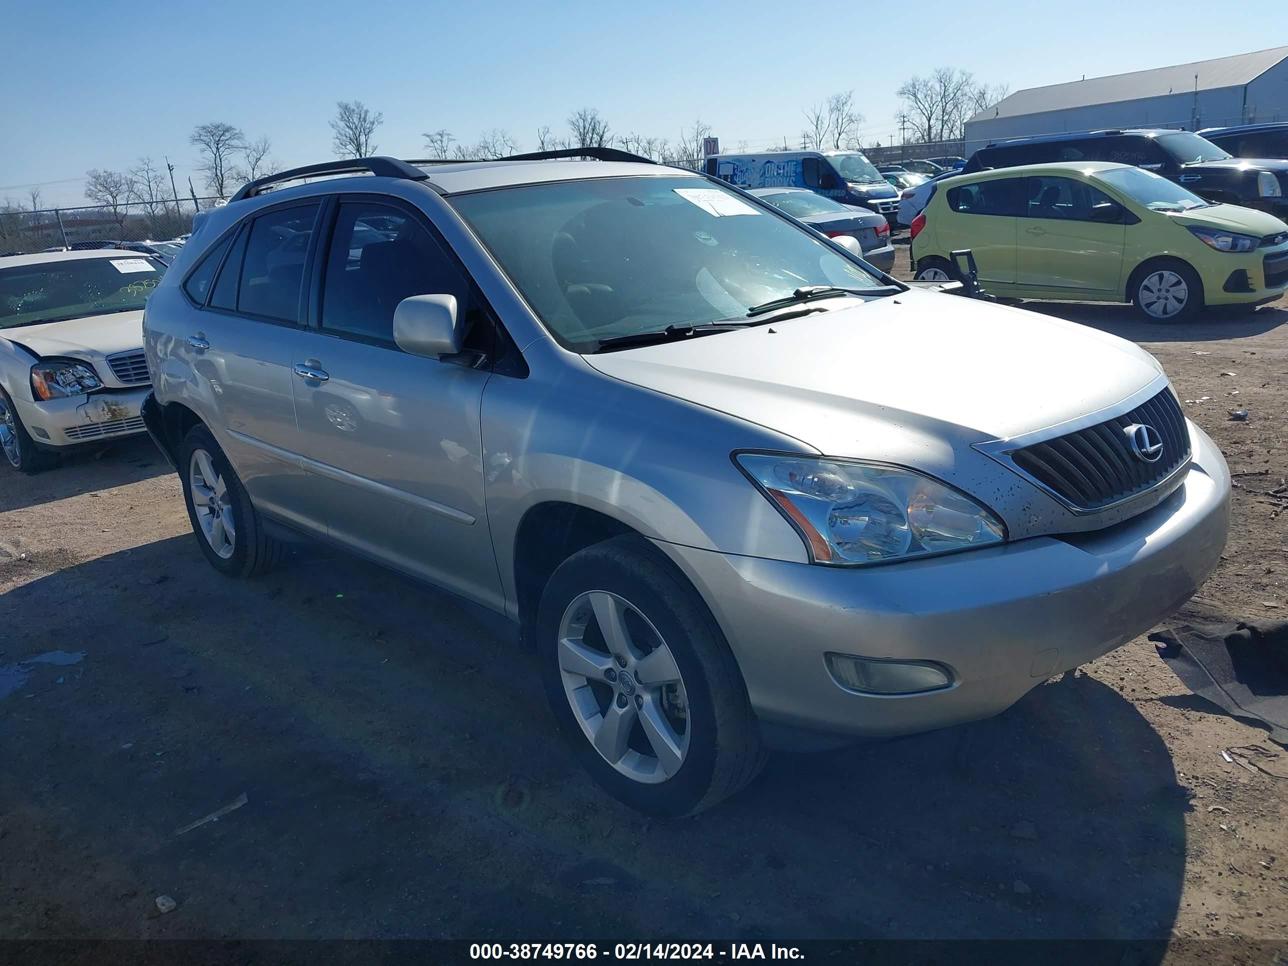 vin: 2T2GK31U28C047040 2T2GK31U28C047040 2008 lexus rx 3500 for Sale in 45069, 10100 Windisch Rd, West Chester, Ohio, USA